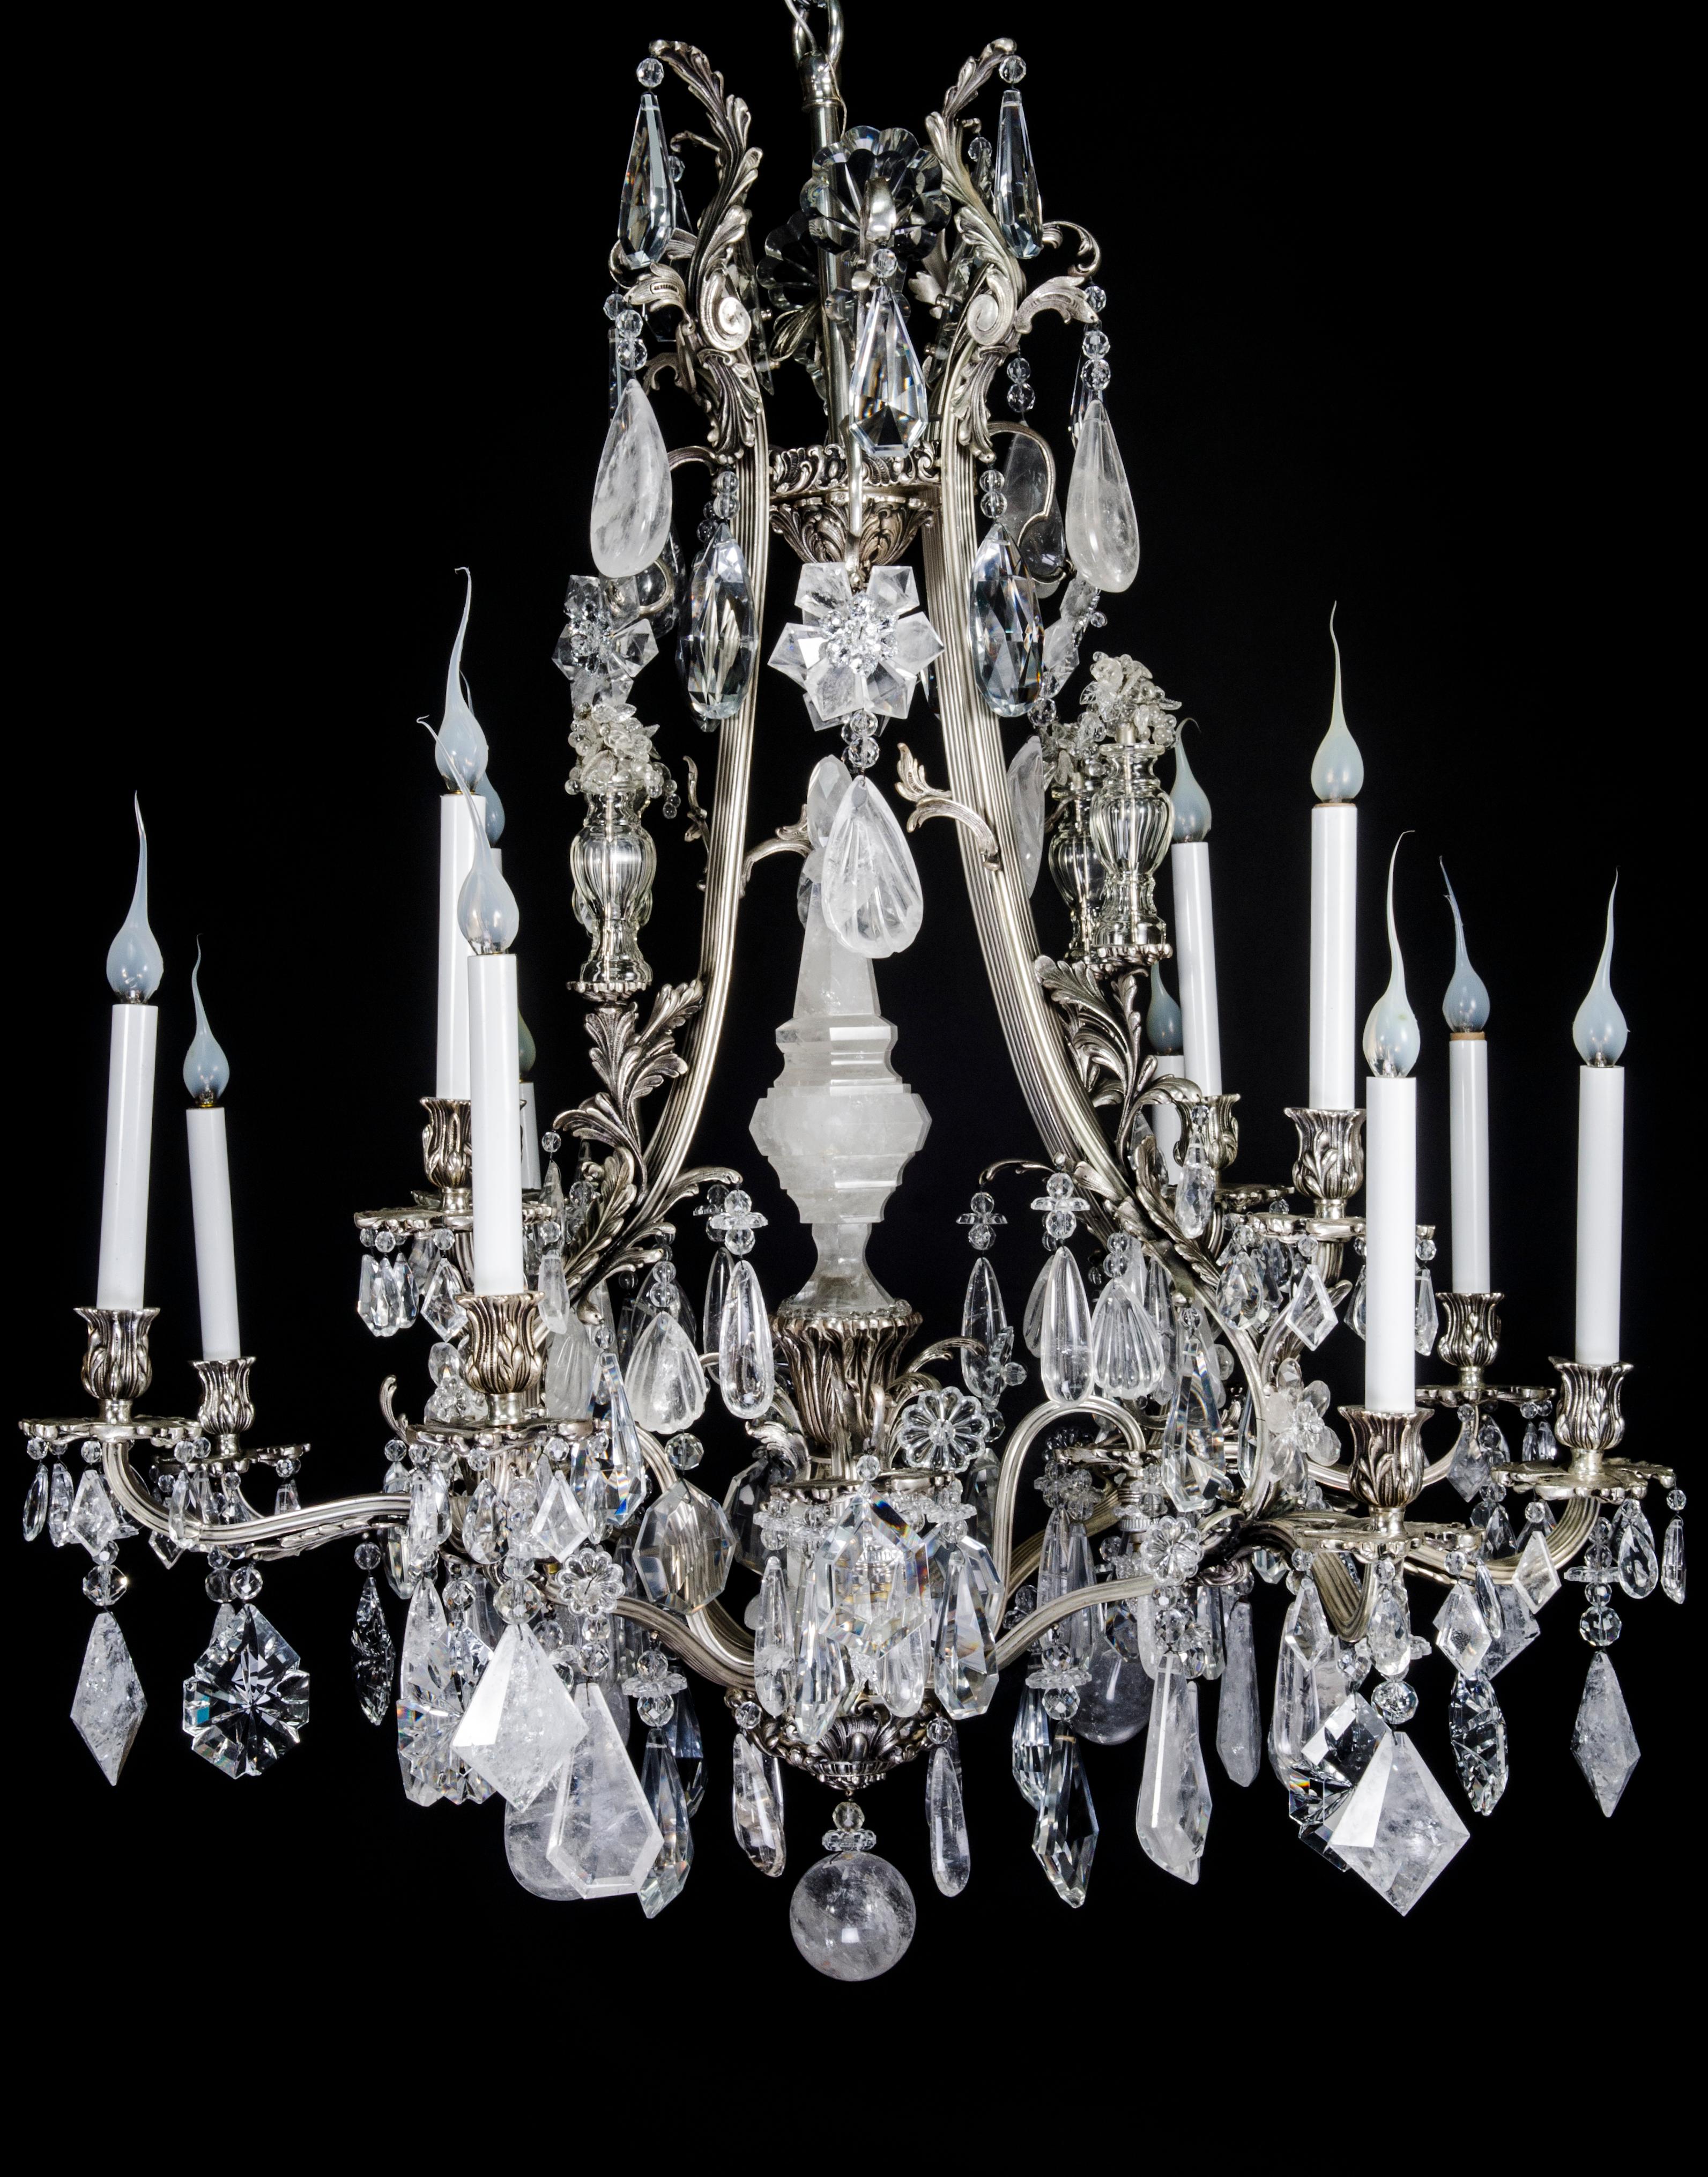 A unique and large antique French louis XVI style silvered bronze, cut rock crystal and cut-crystal multi light double tier chandelier of exquisite quality embellished with fine cut rock crystal prisms, rock crystal flowers, four corner crystal